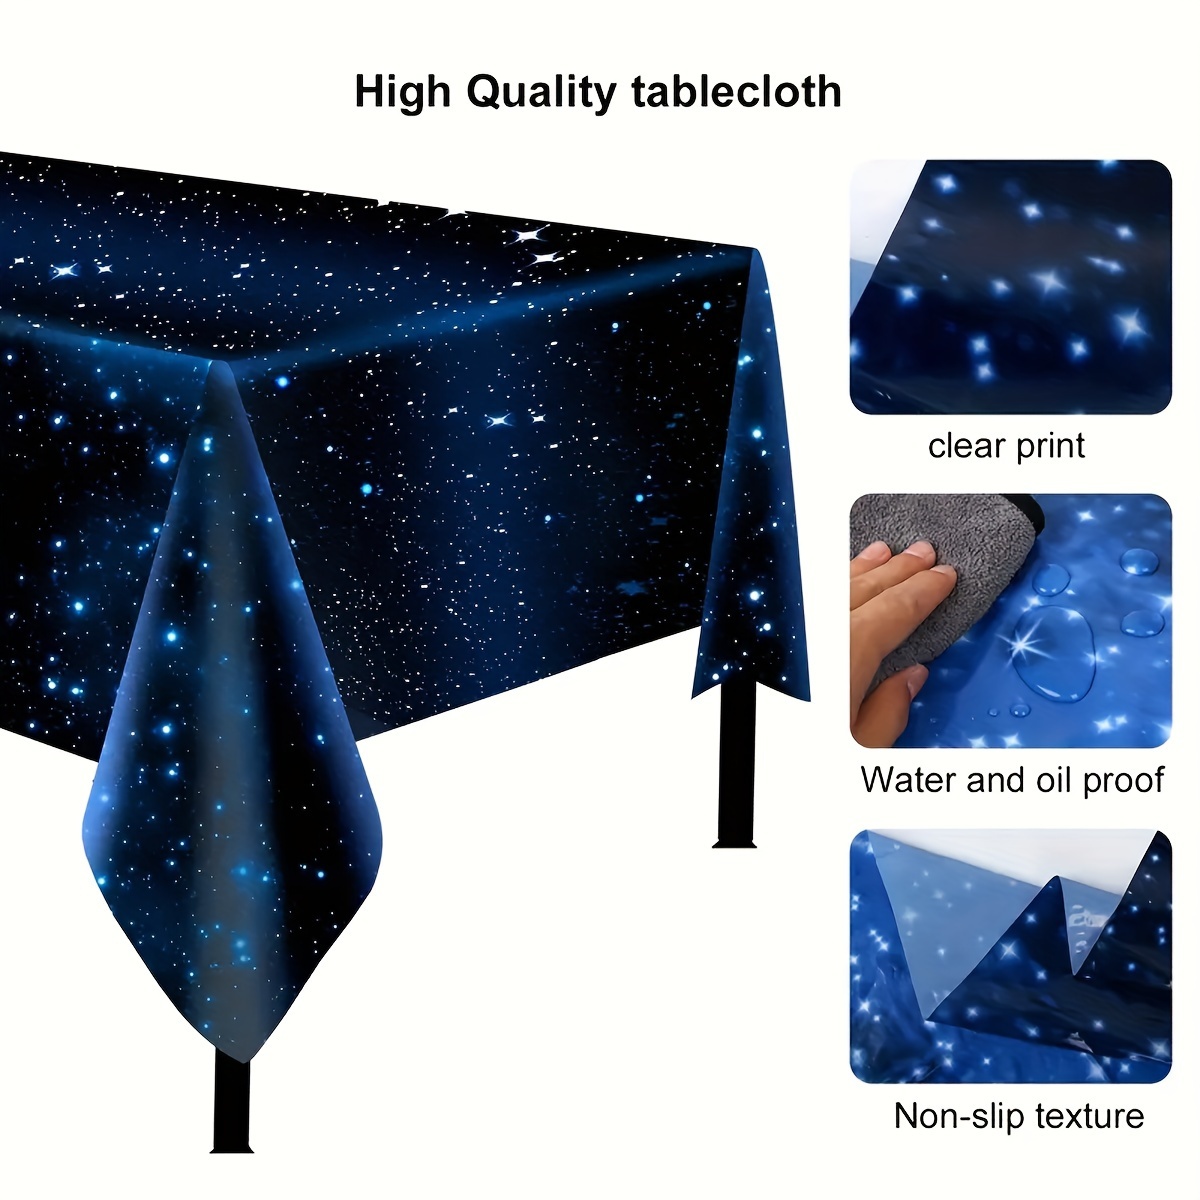 

2pcs Table Cloth, Disposable Plastic Tablecloth Set, Space Star Galaxy Theme Non-slip Tablecloth, For Birthday Home Decoration And Party Decor, Home Supplies